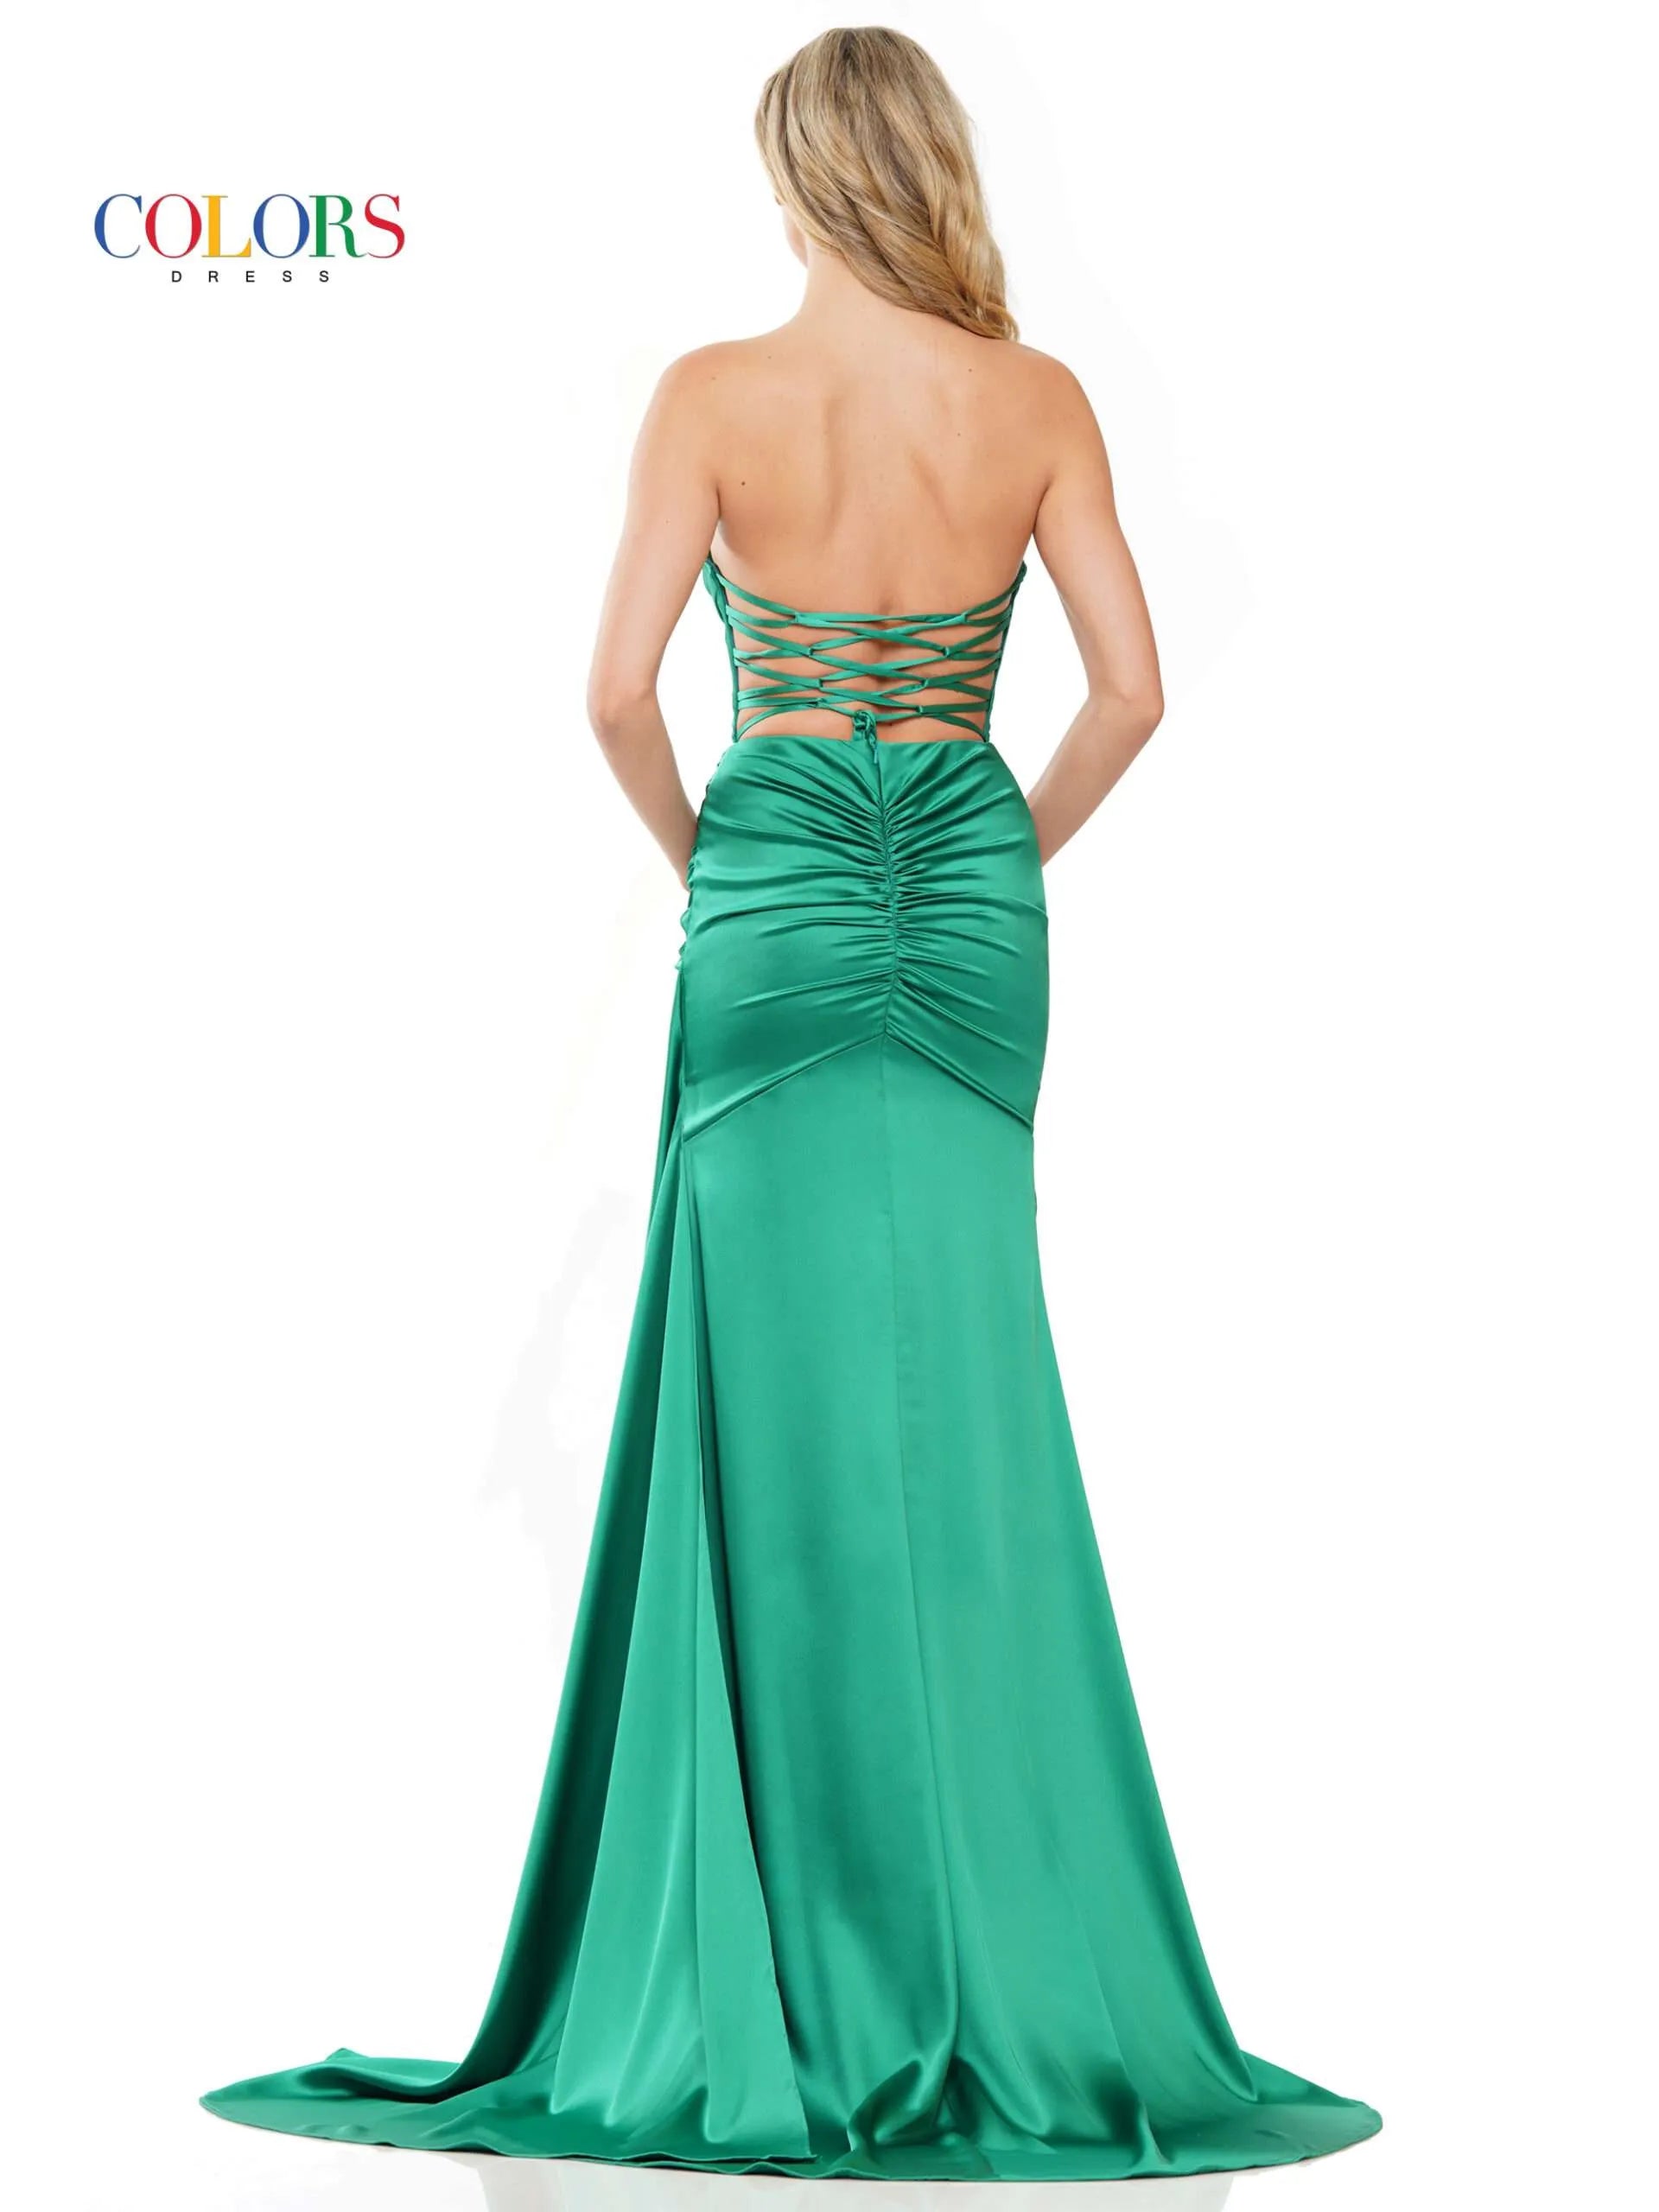 Enhance your formal look with the Colors Dress 2968 Long Prom Dress. The fitted satin design flatters your figure while the high slit adds a touch of elegance. With ruching details and a formal pageant gown style, you'll make a stylish statement at any event.